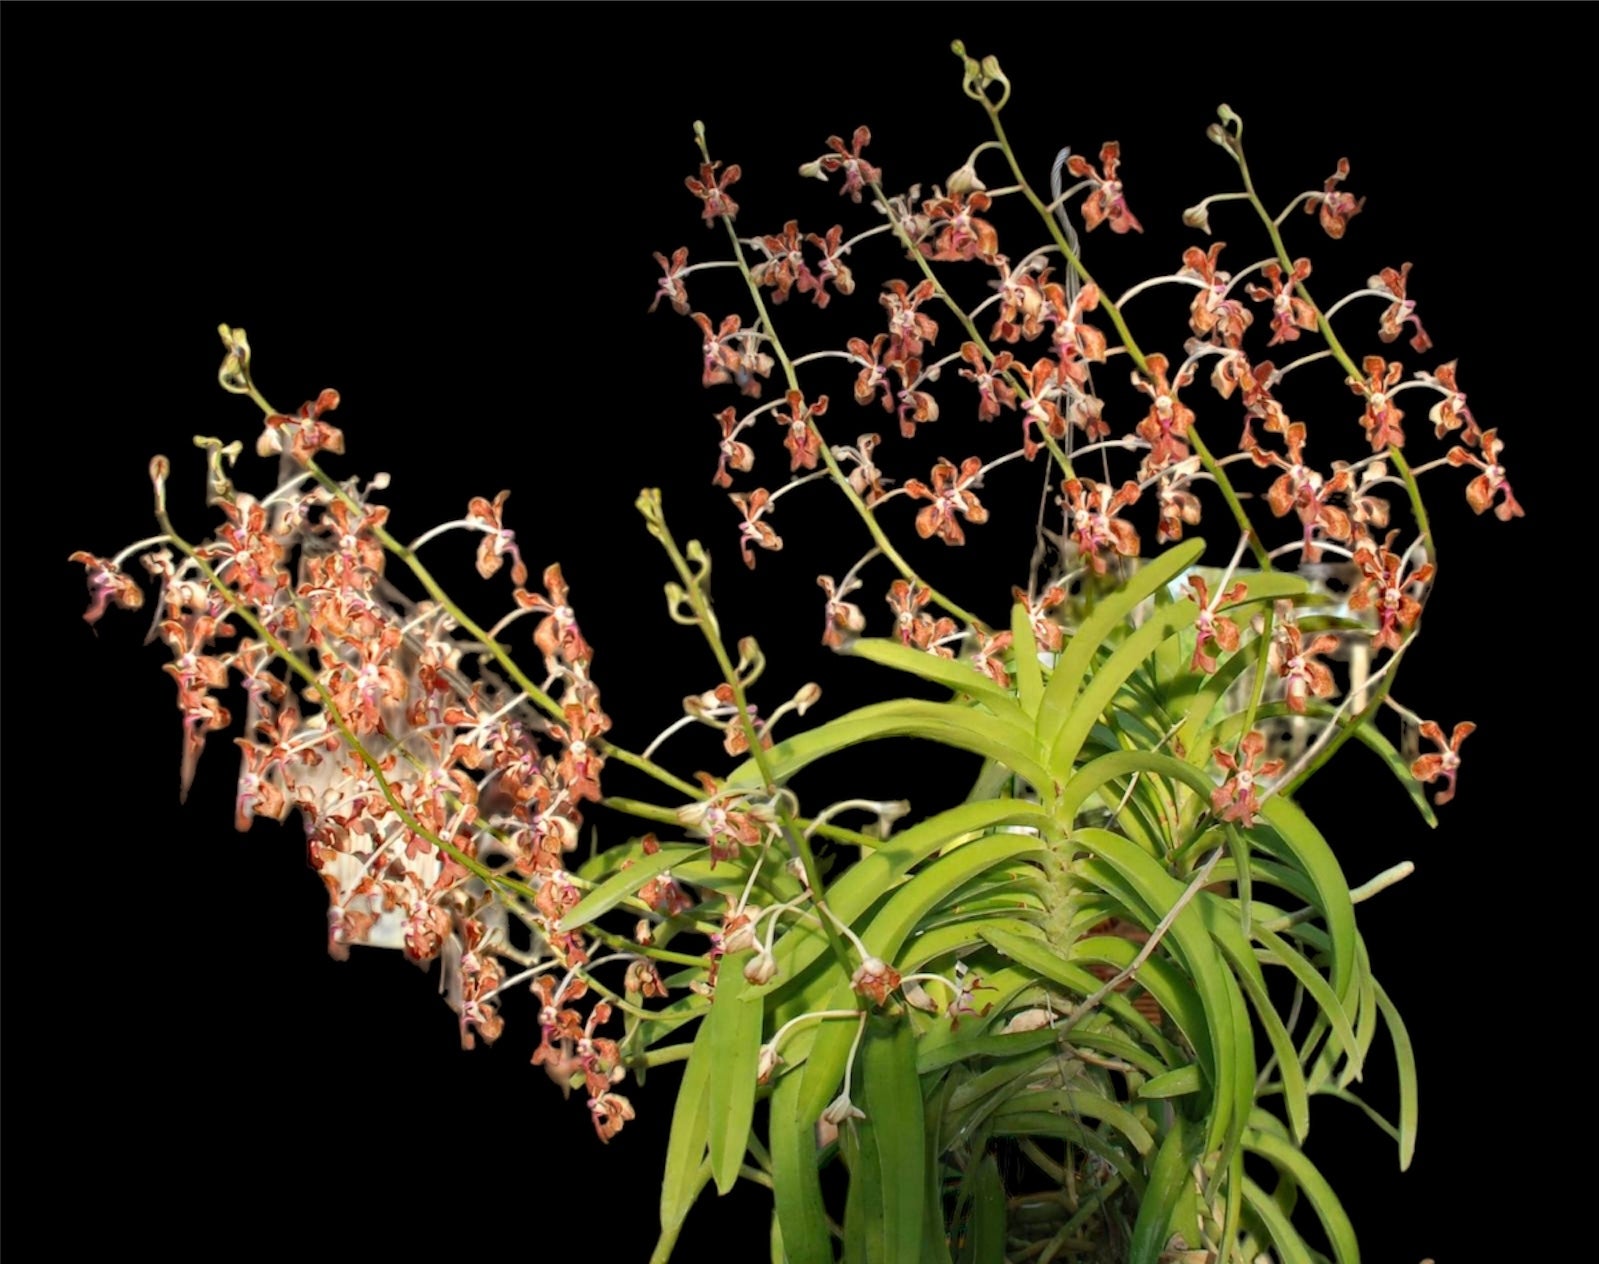 Vanda liouvillei species ( some in spike while available)